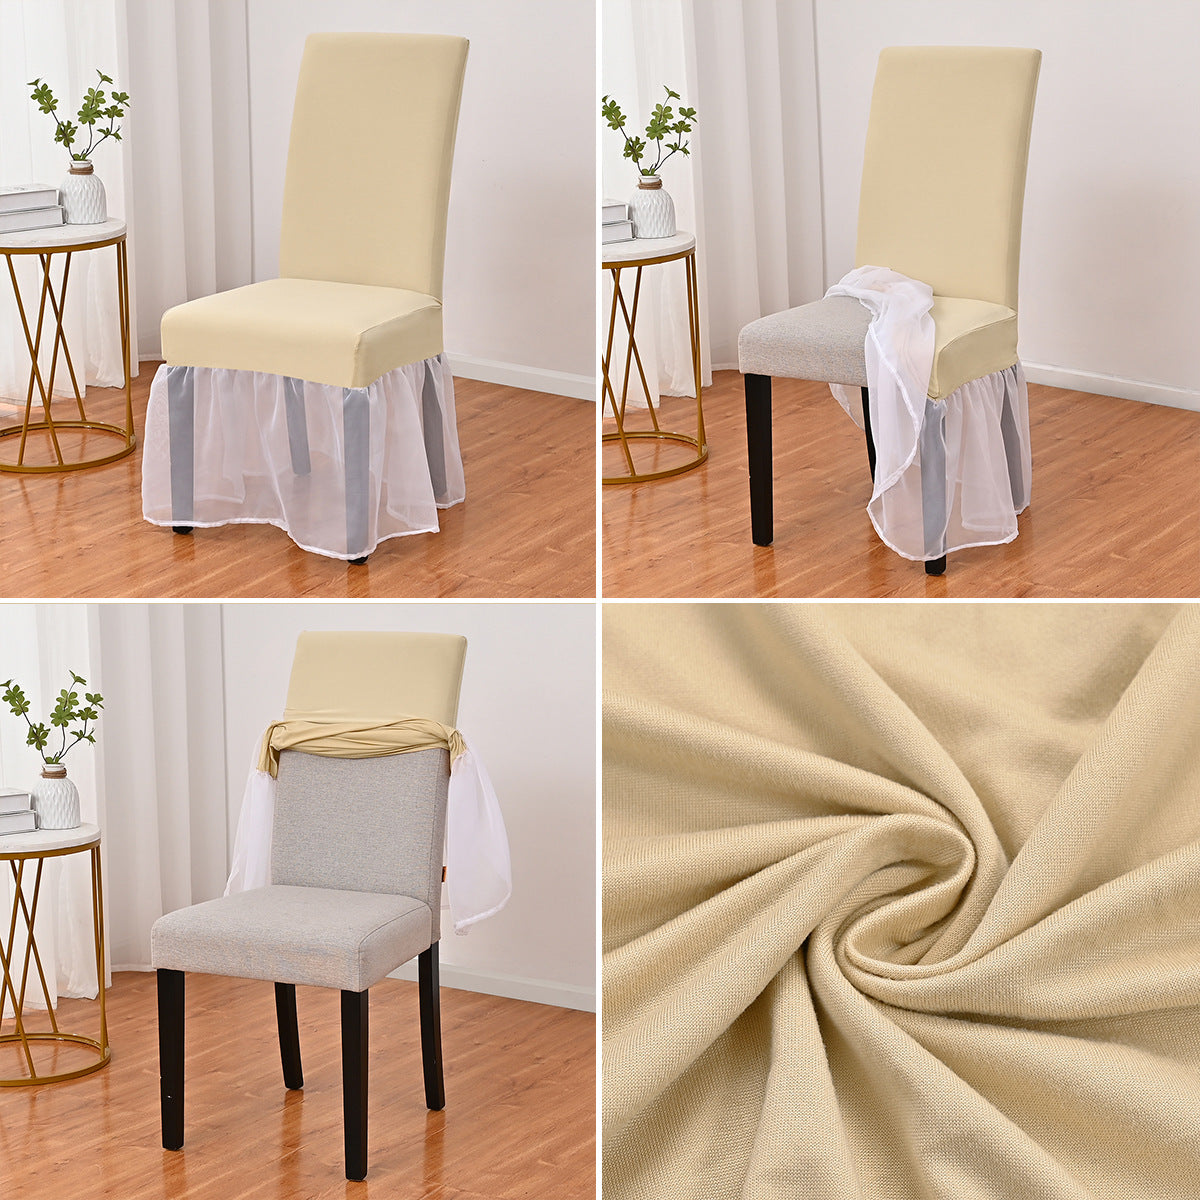 Bulk Milk Silk Gauze Skirt Chair Cover suitable for Hotel Restaurant Conference Banquet Wedding and Party Decoration Wholesale